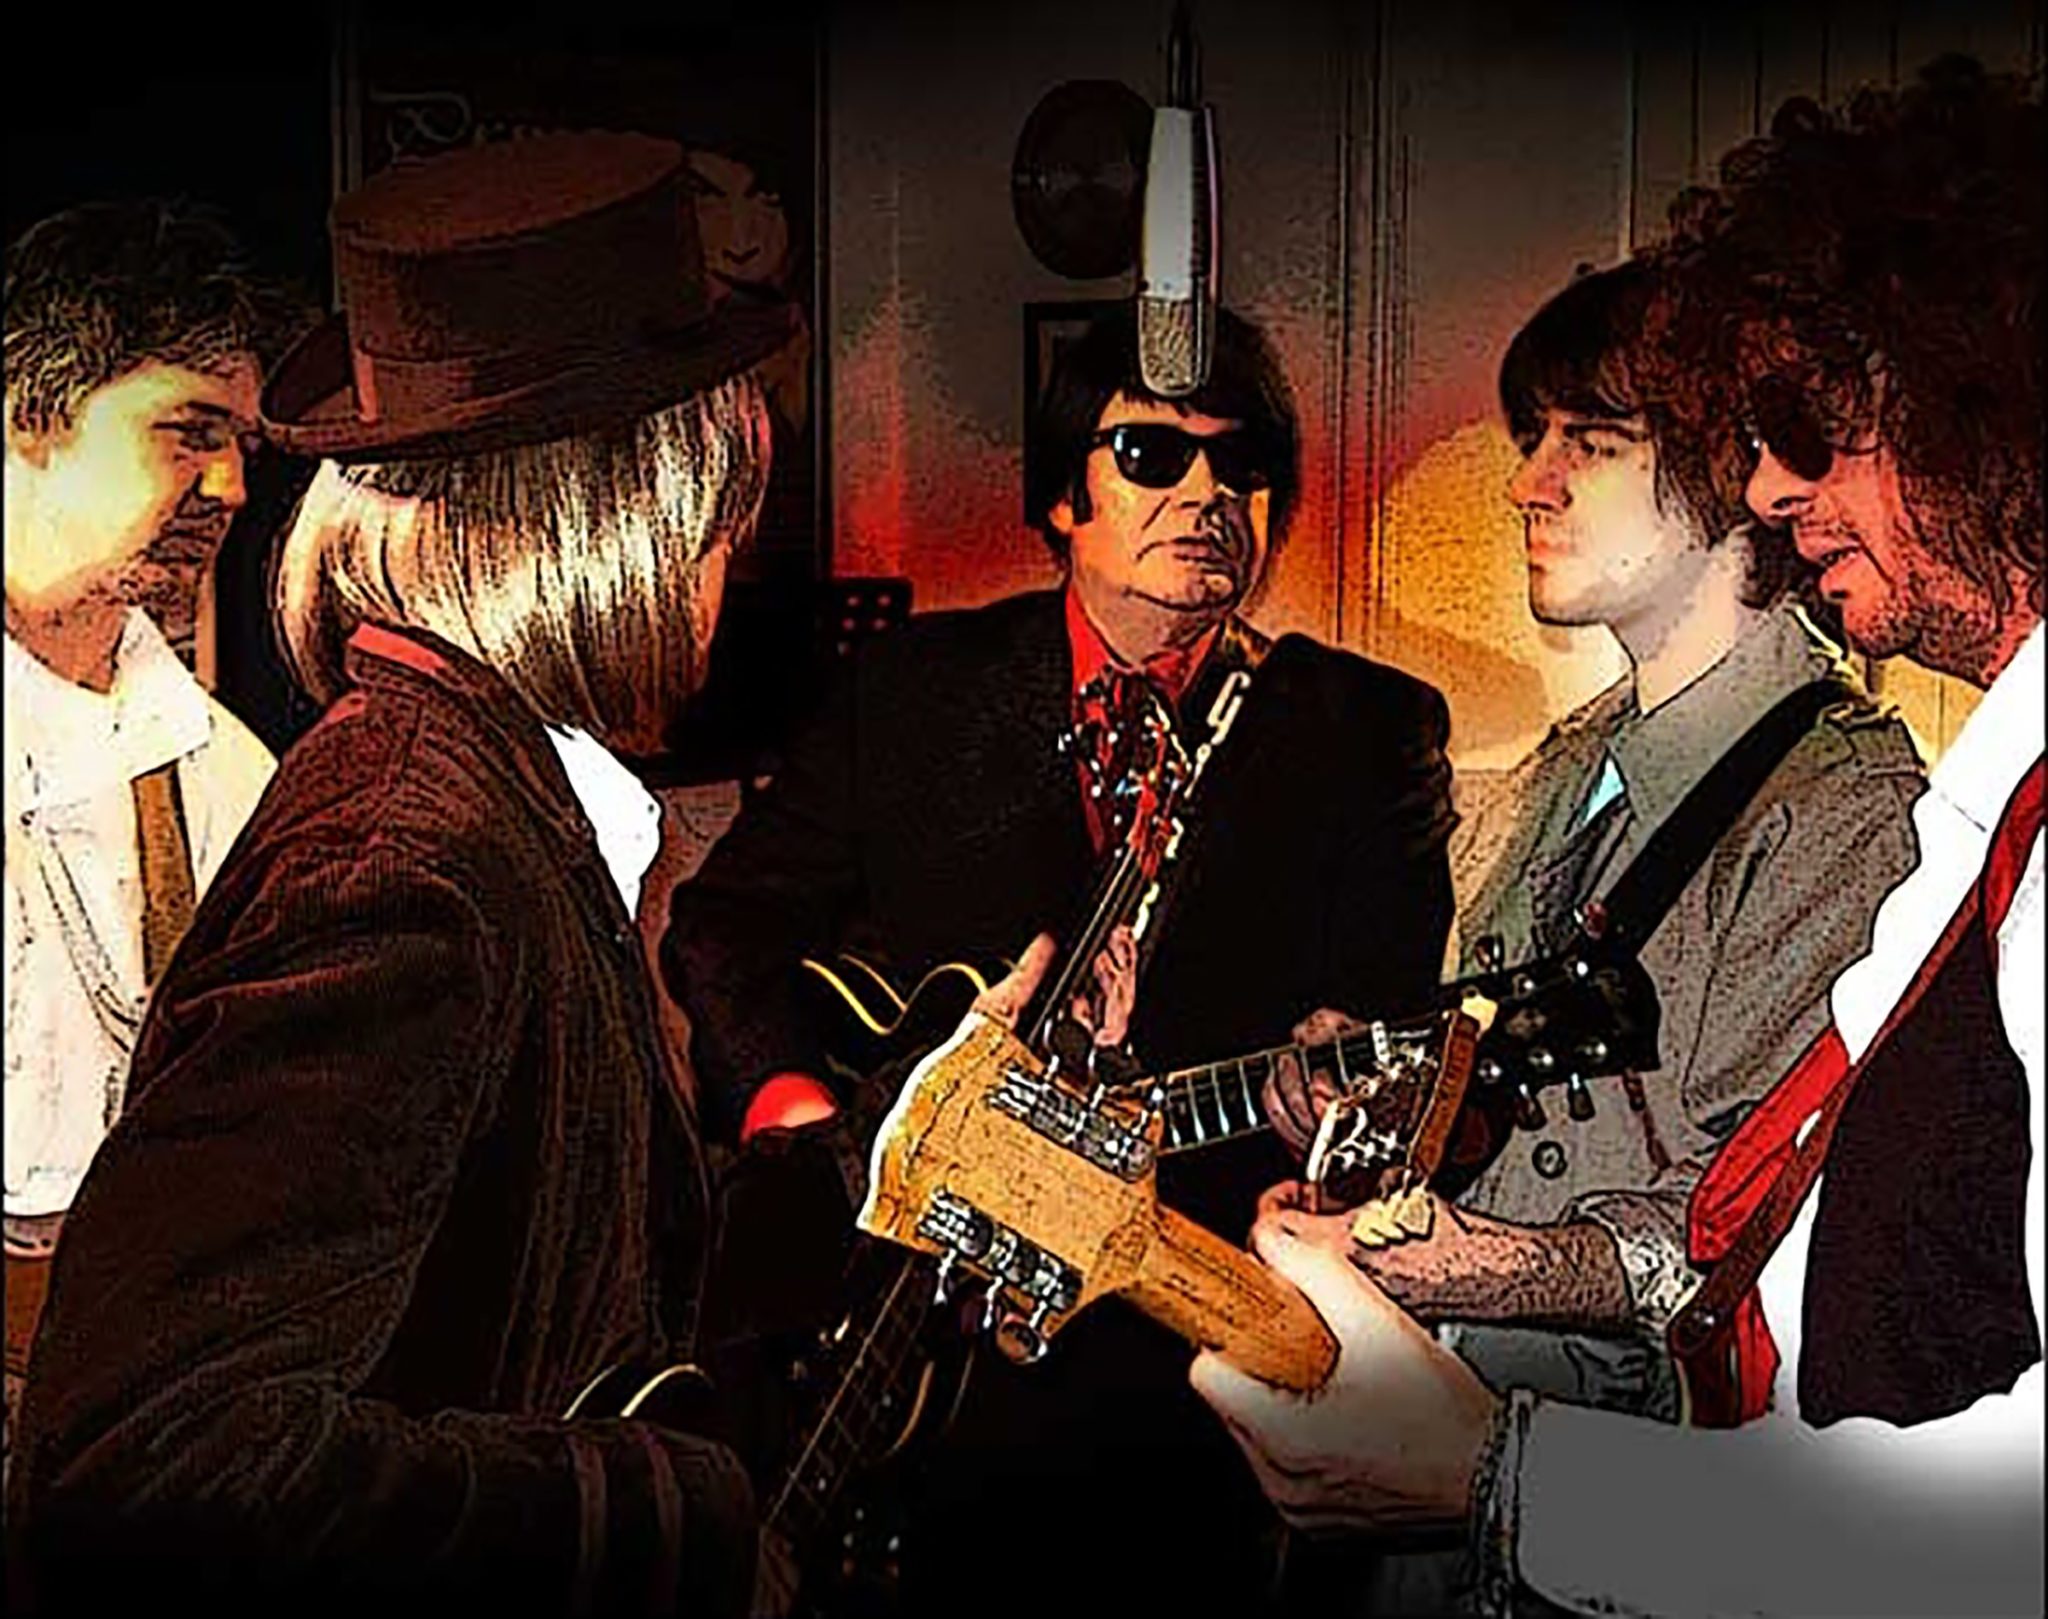 Roy Orbison and Traveling Wilburys tribute 🗓